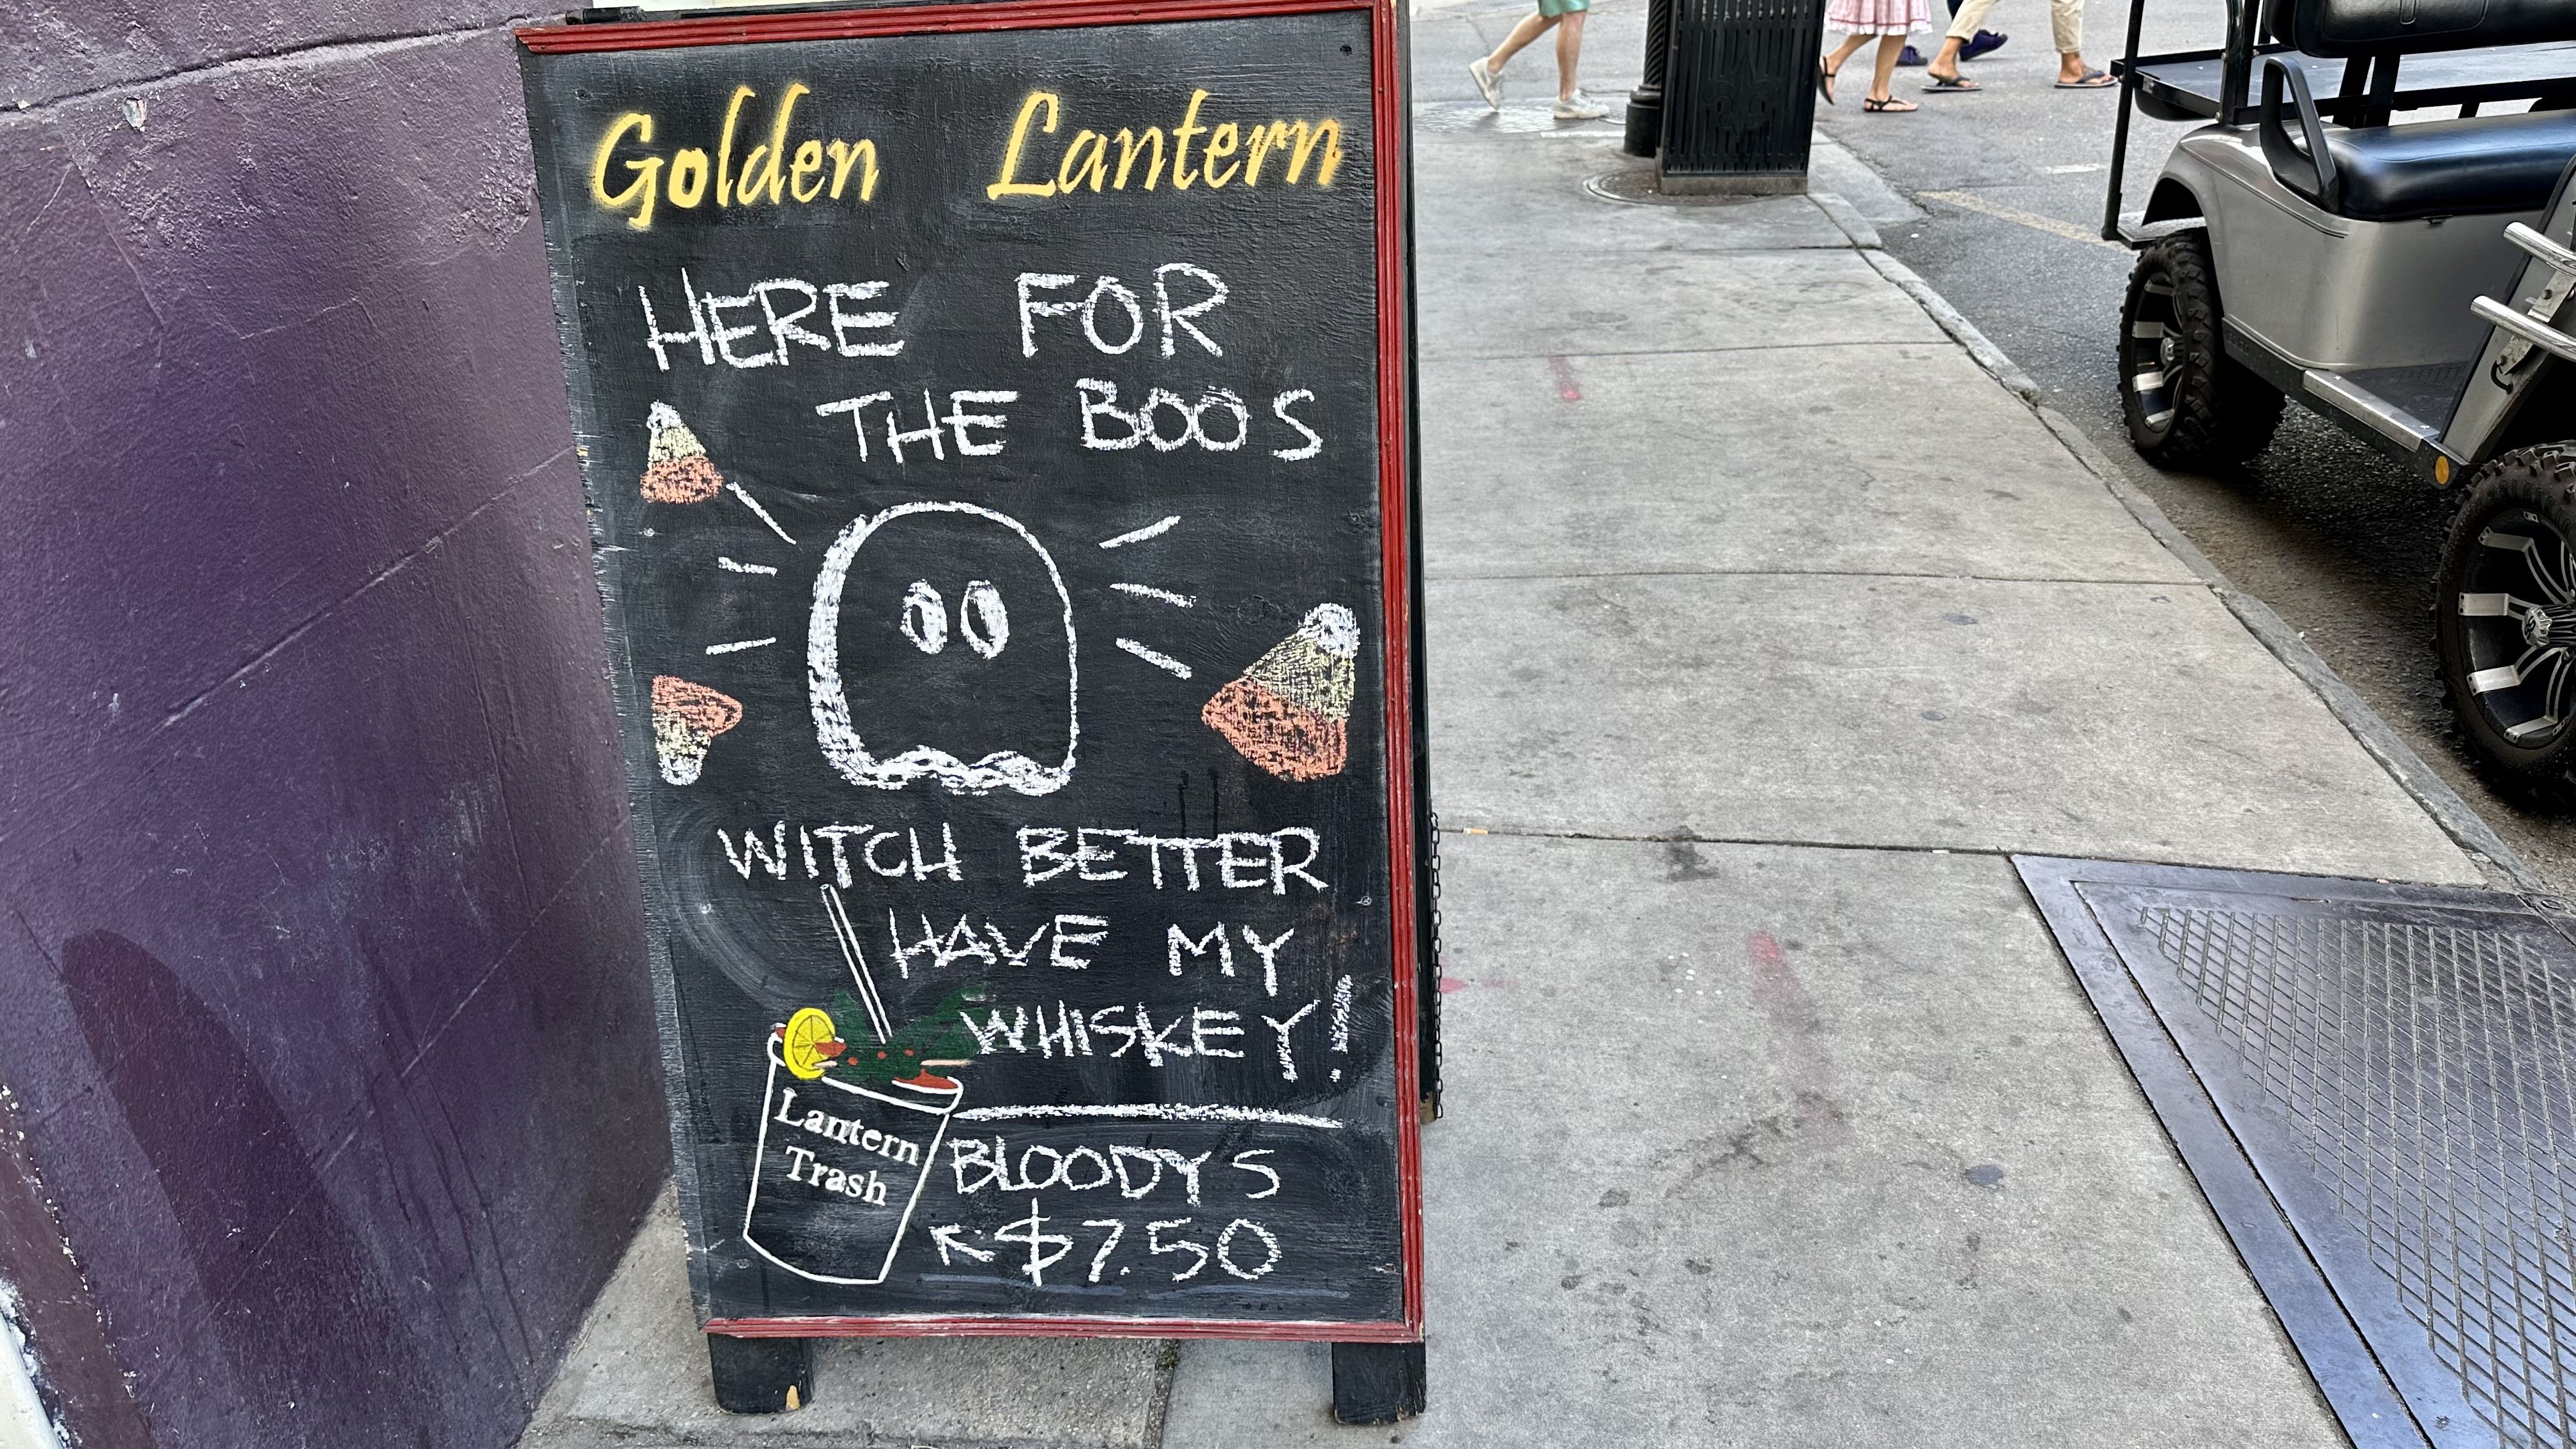 Photo shows the Halloween-themed drink board at Golden Lantern